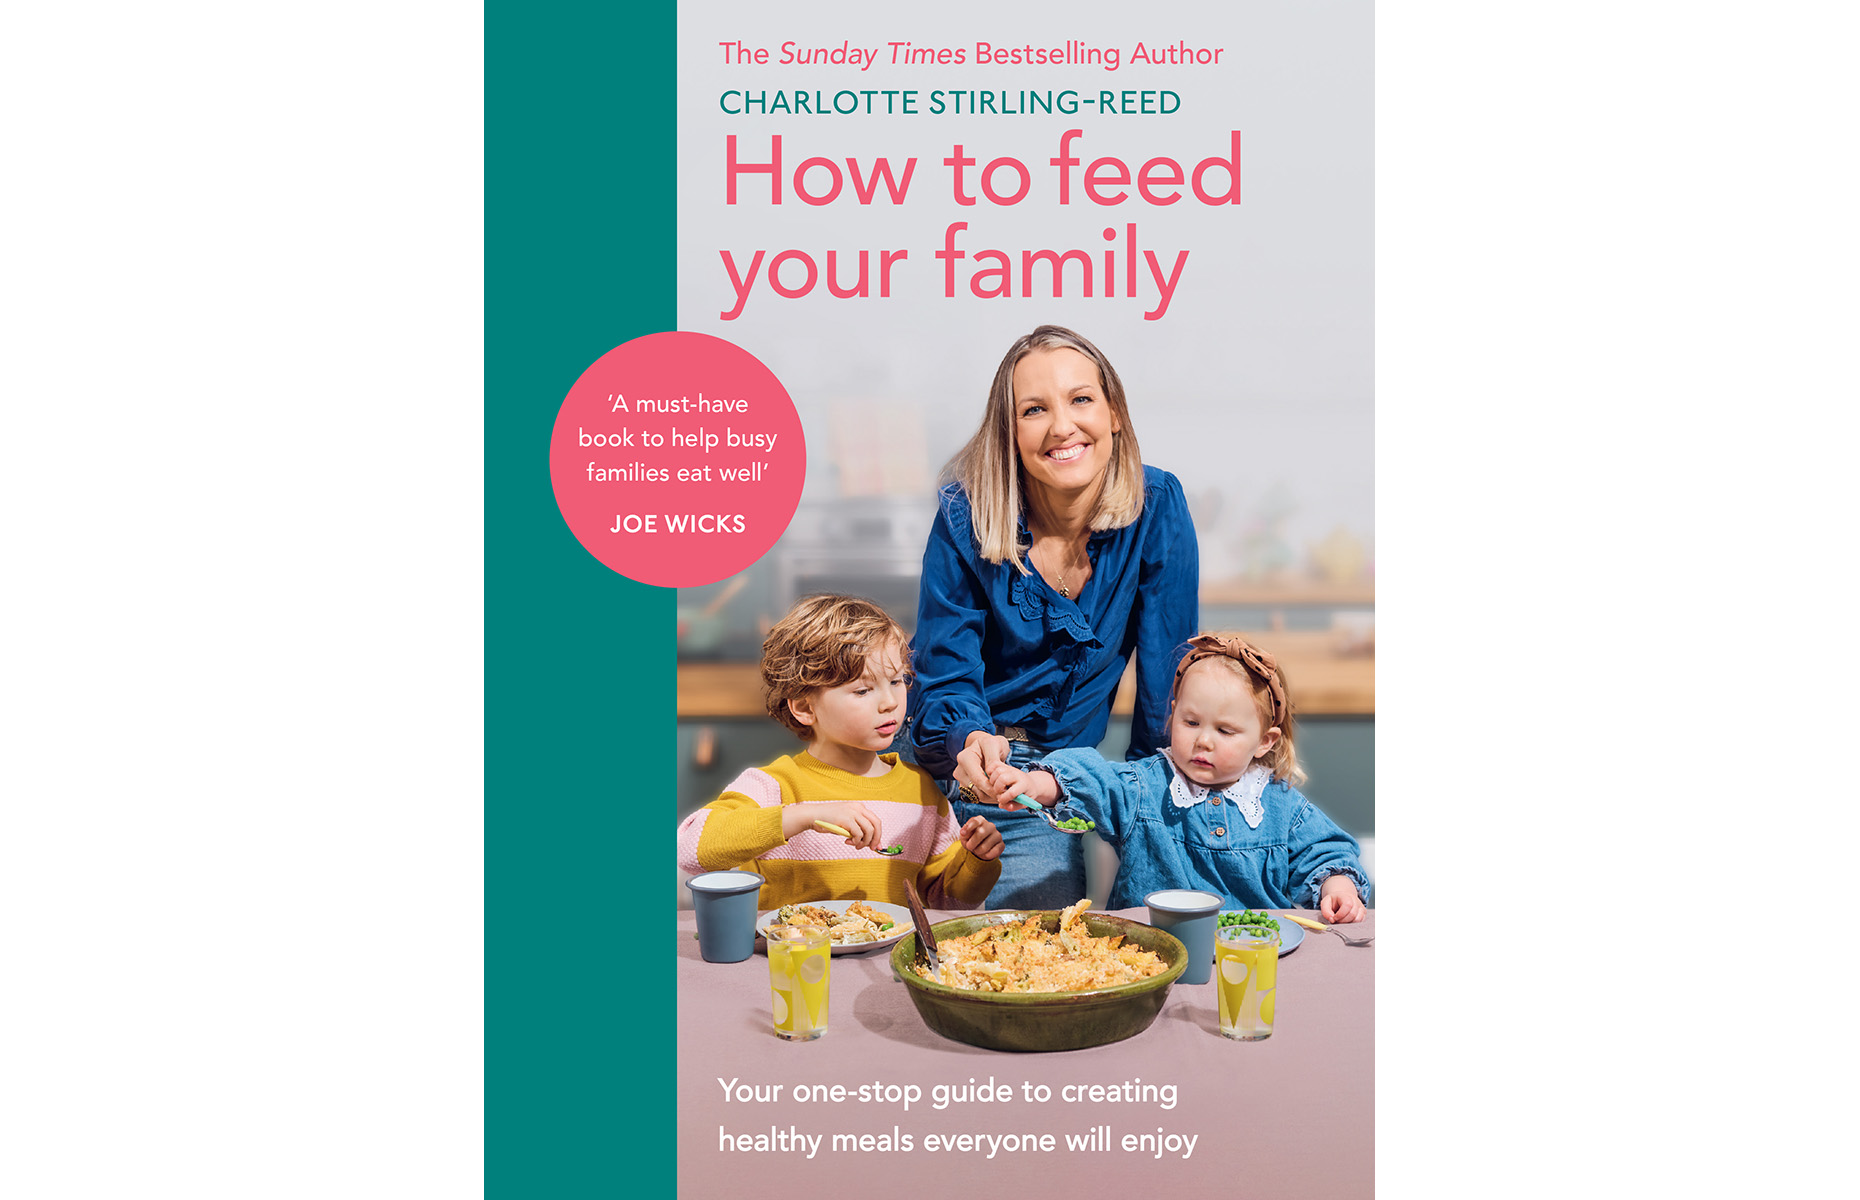  How to feed your family: Your one-stop guide to creating healthy meals that everyone will enjoy by Charlotte Stirling-Reed.